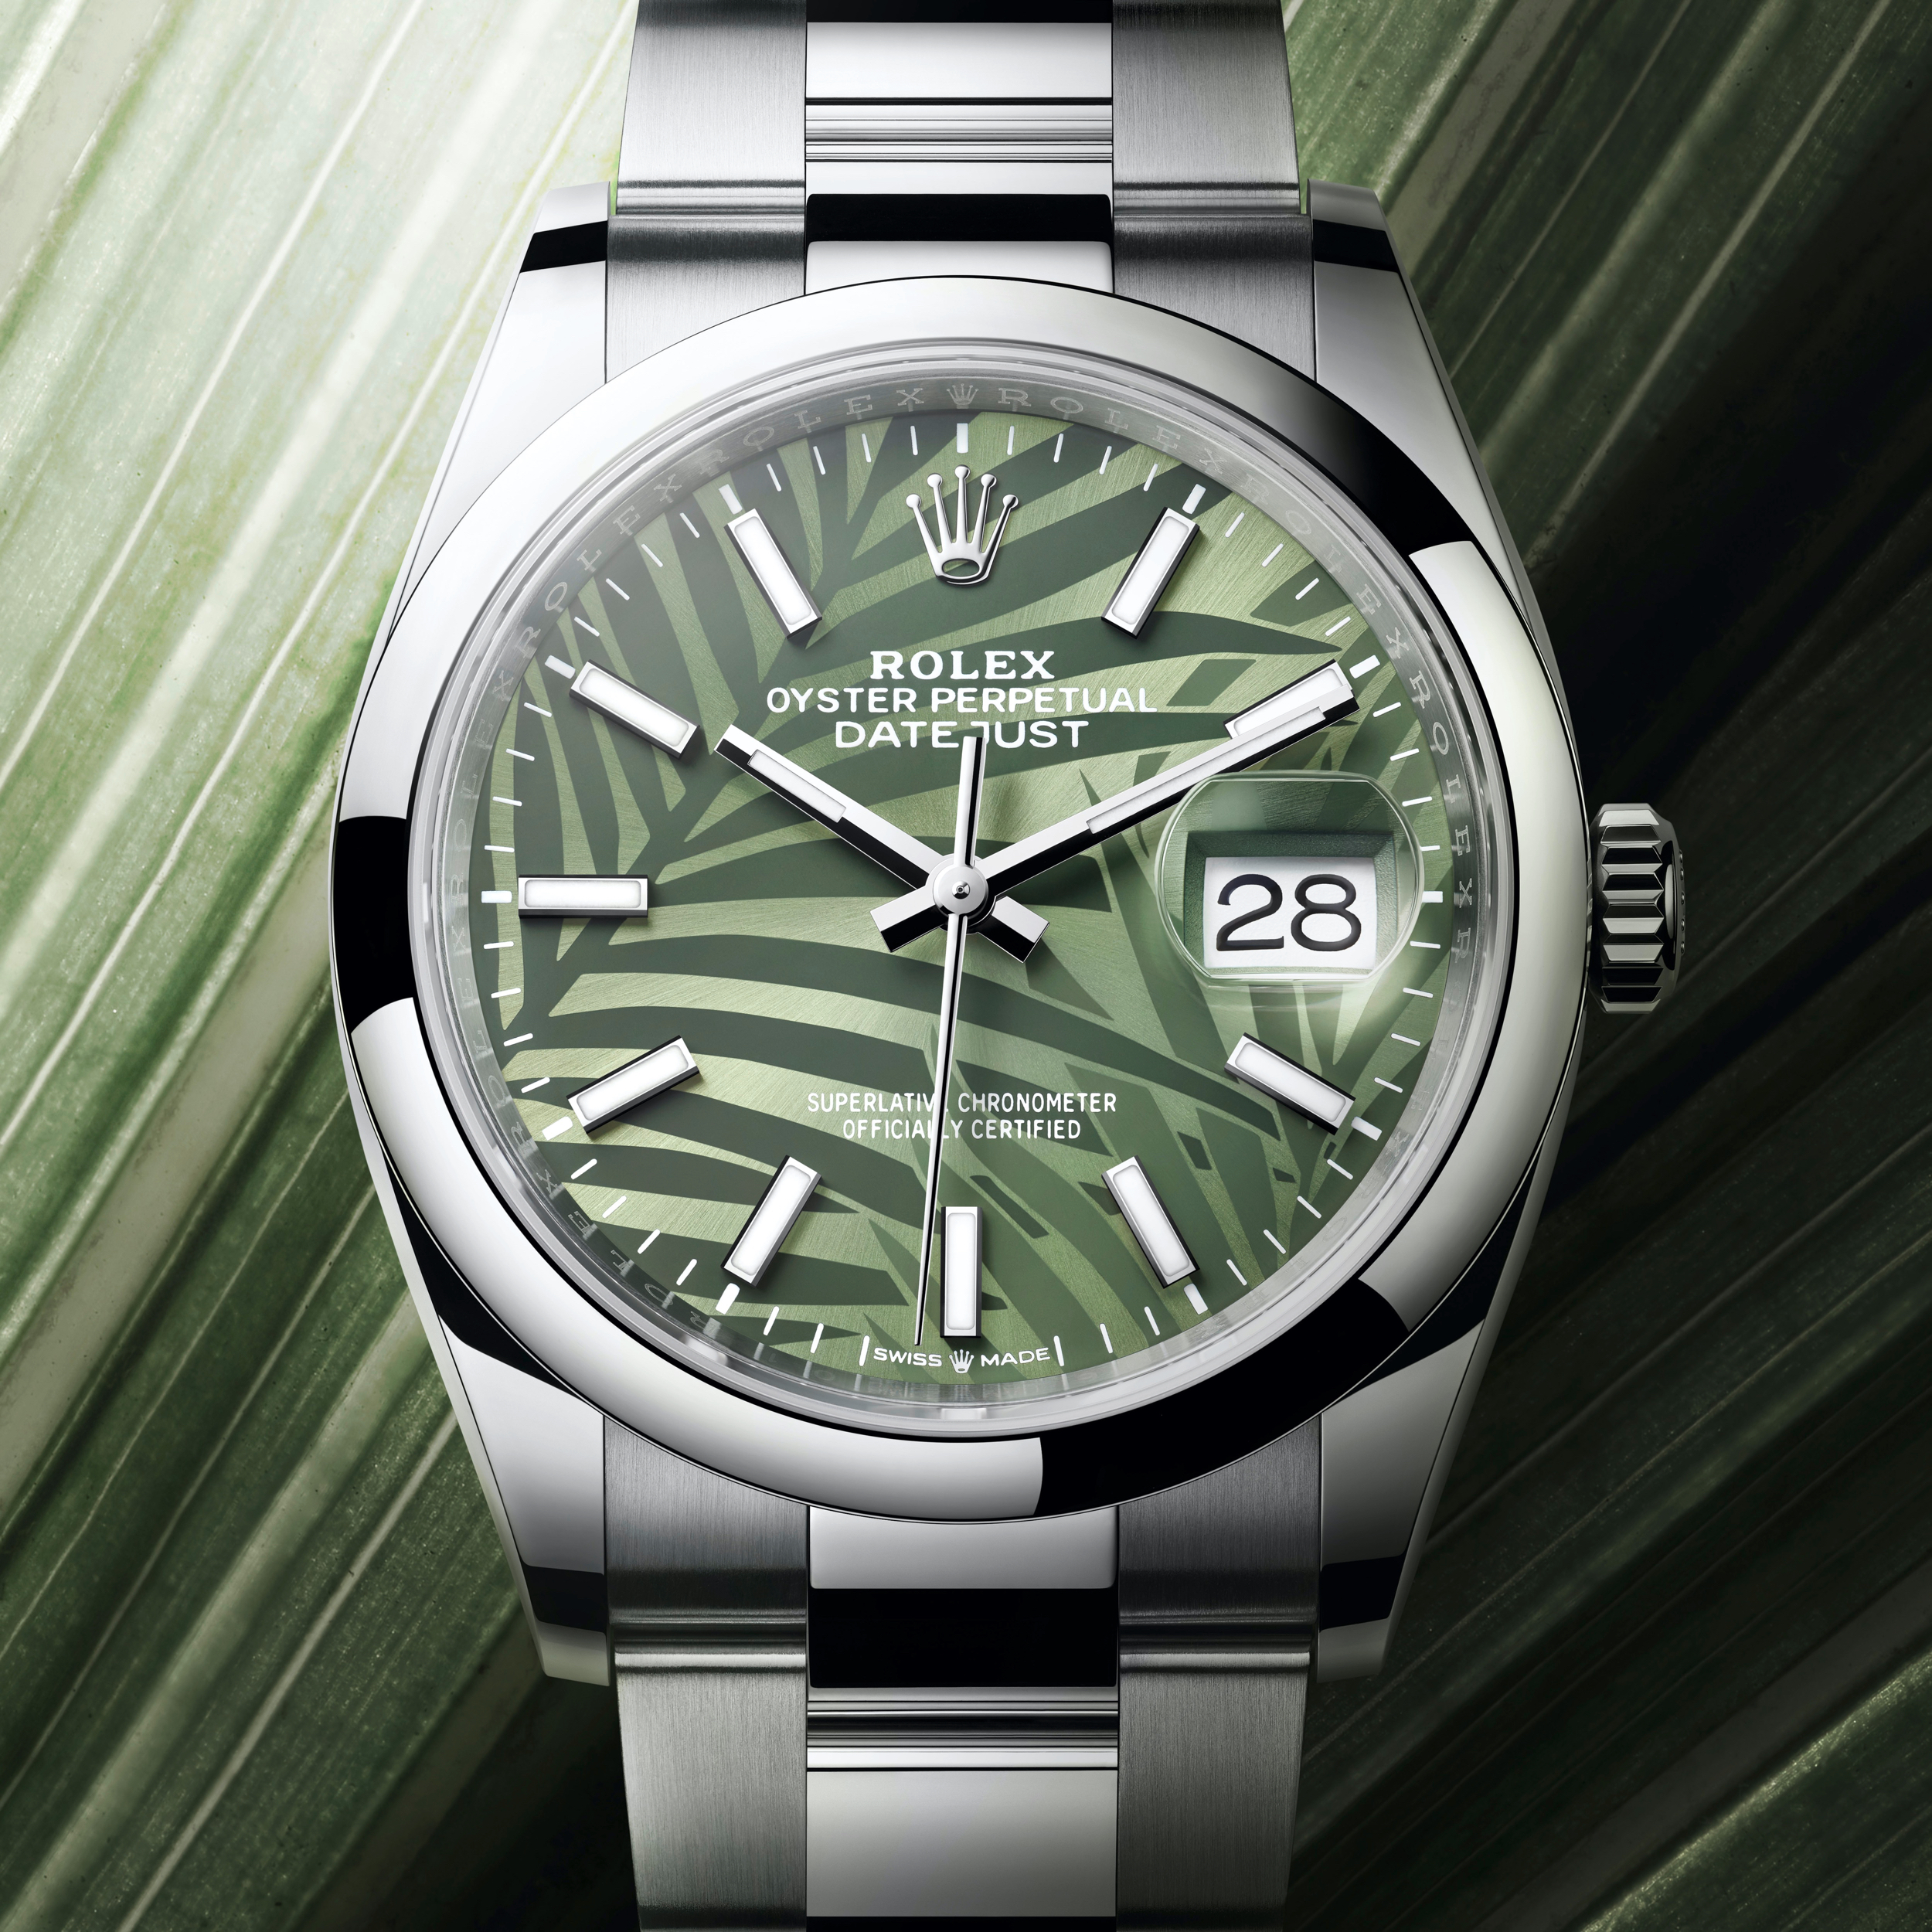 The Rolex Datejust with Olive Green dial